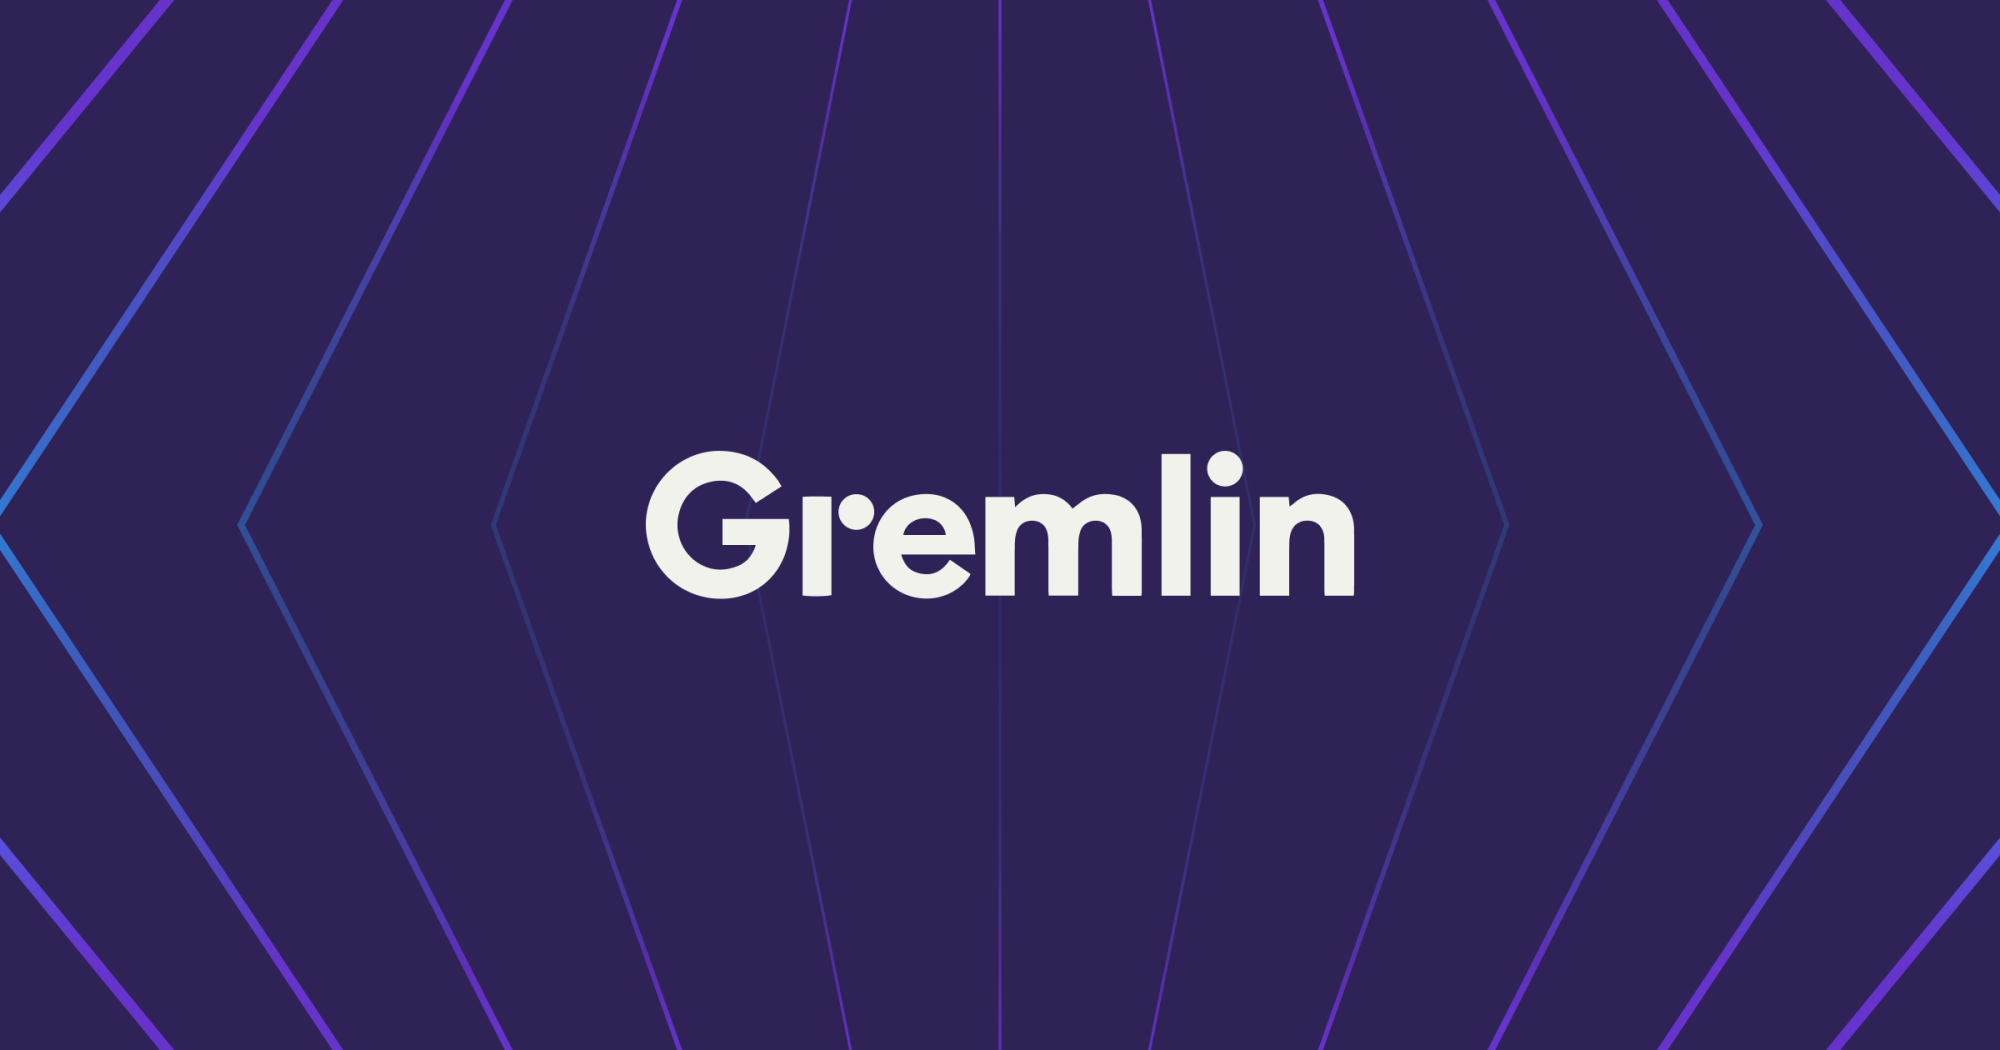 How to Install and Use Gremlin on CentOS 8